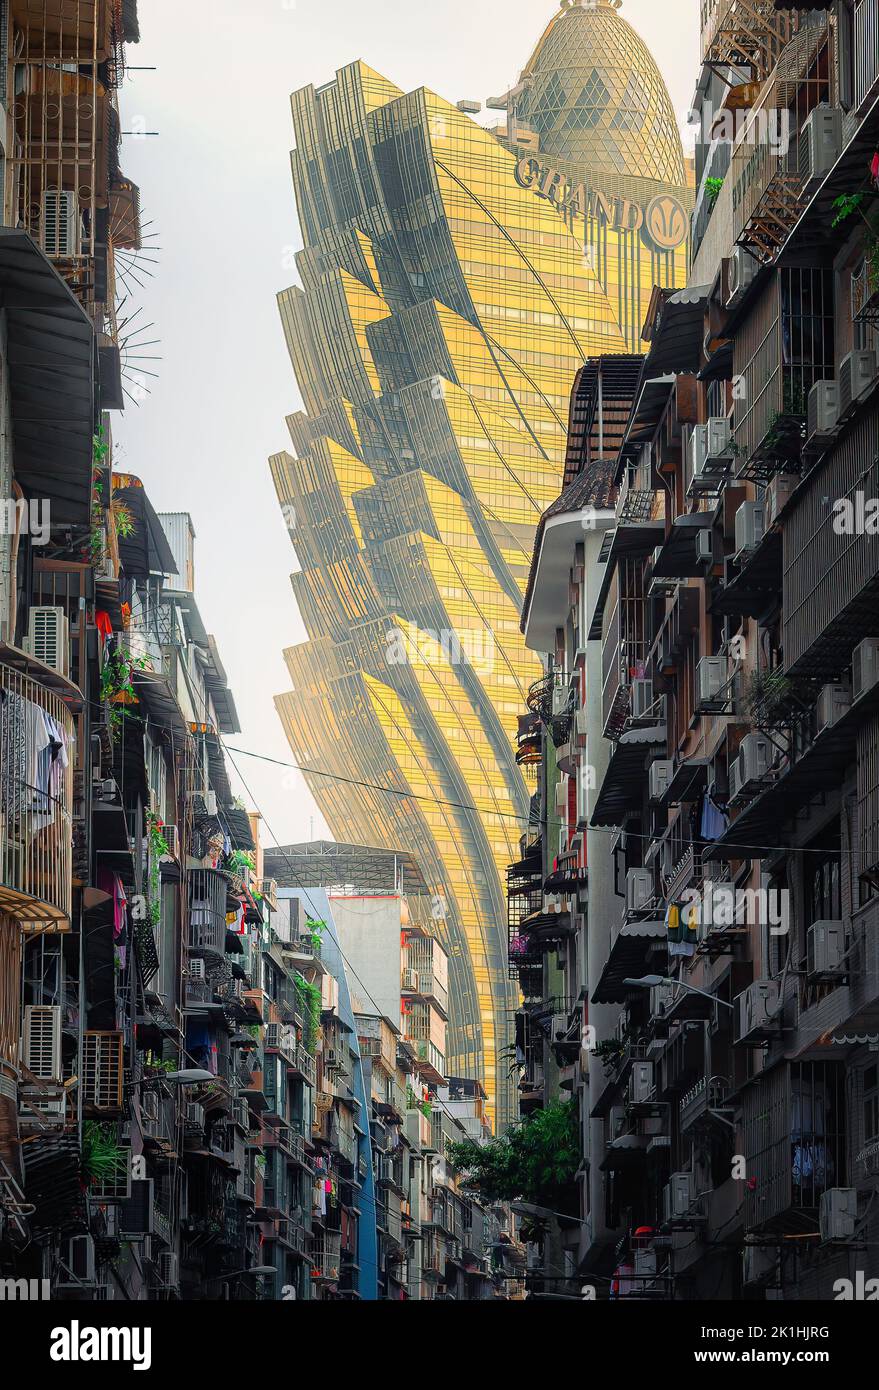 A vertical shot of grand Lisboa Macau architecture from the slums in Macau city, China Stock Photo